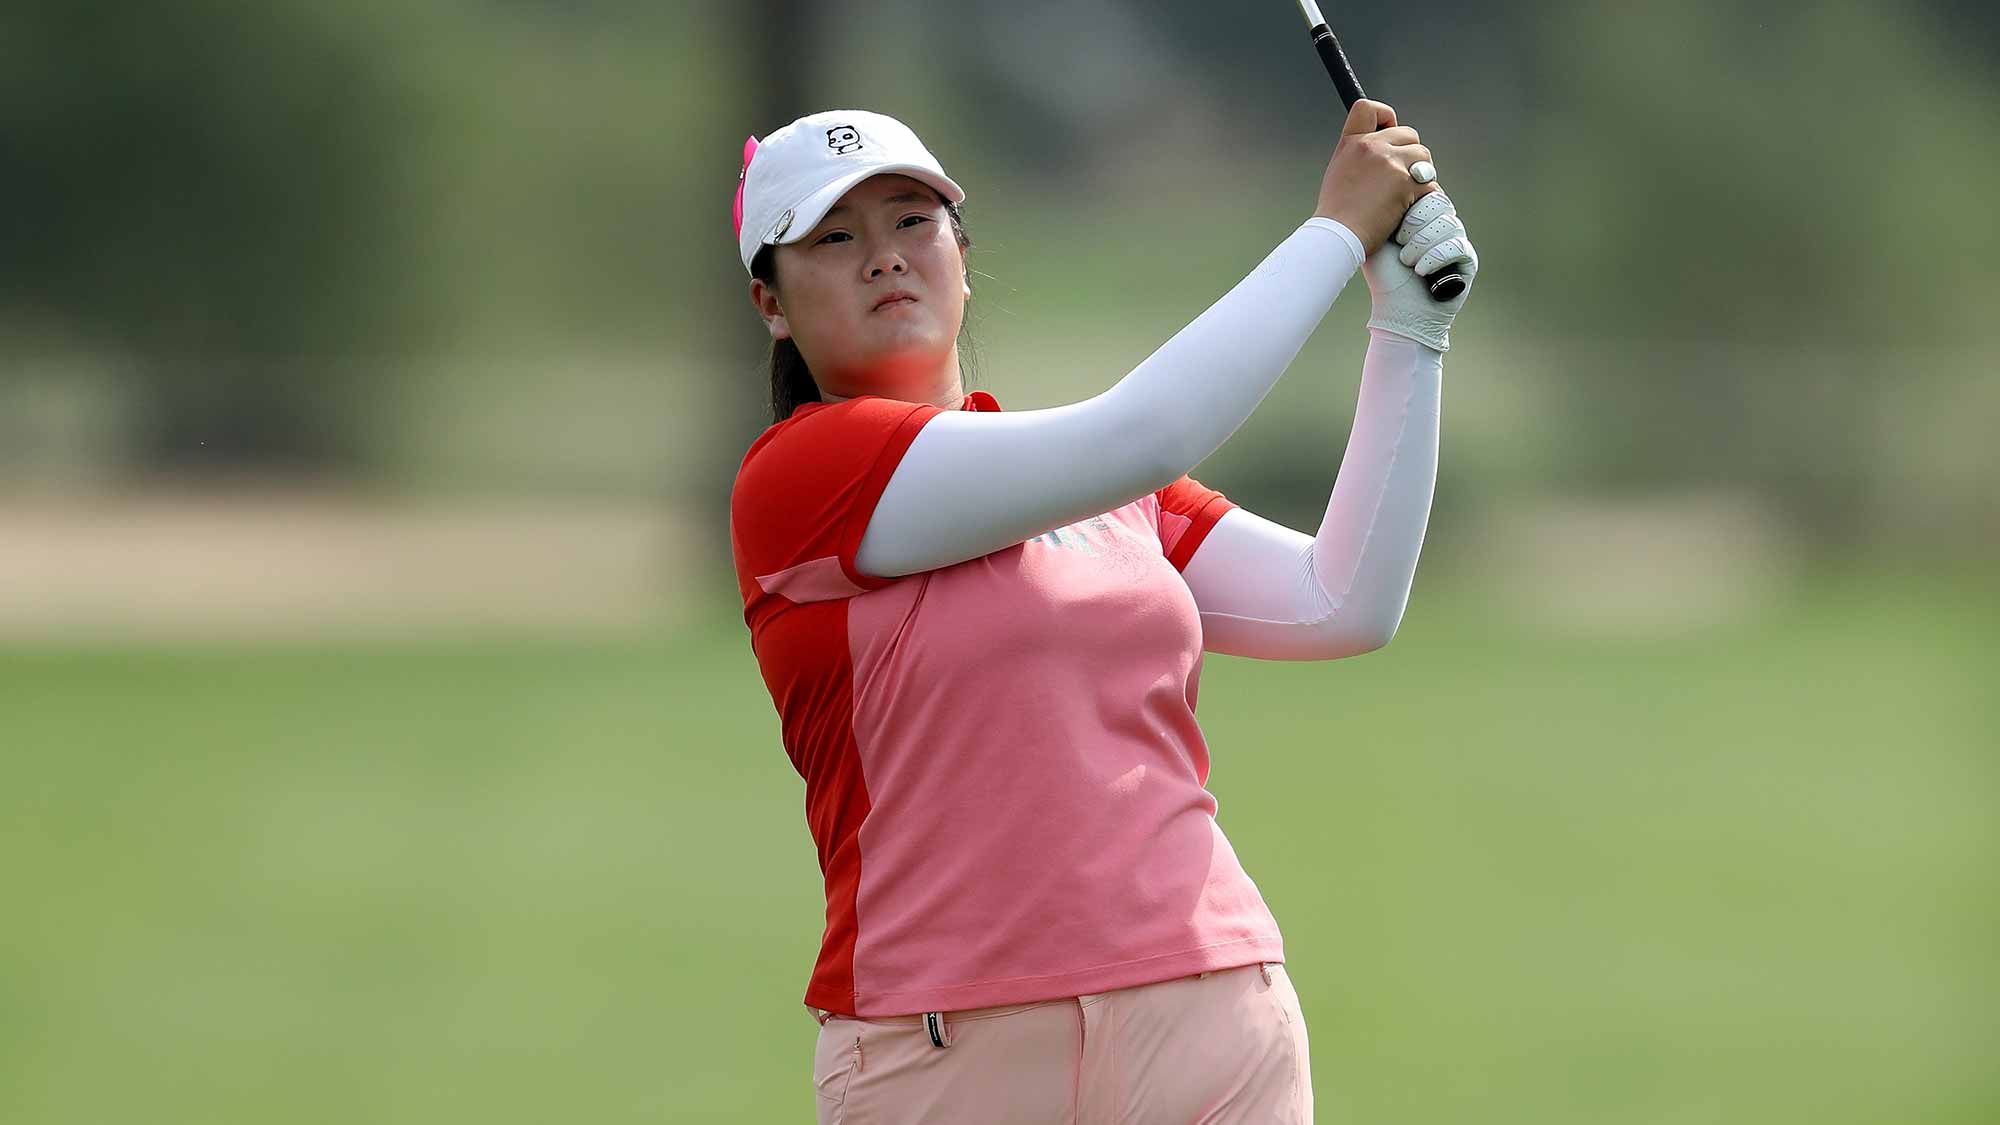 On Other Tours - Yin In Contention In Dubai | LPGA | Ladies ...